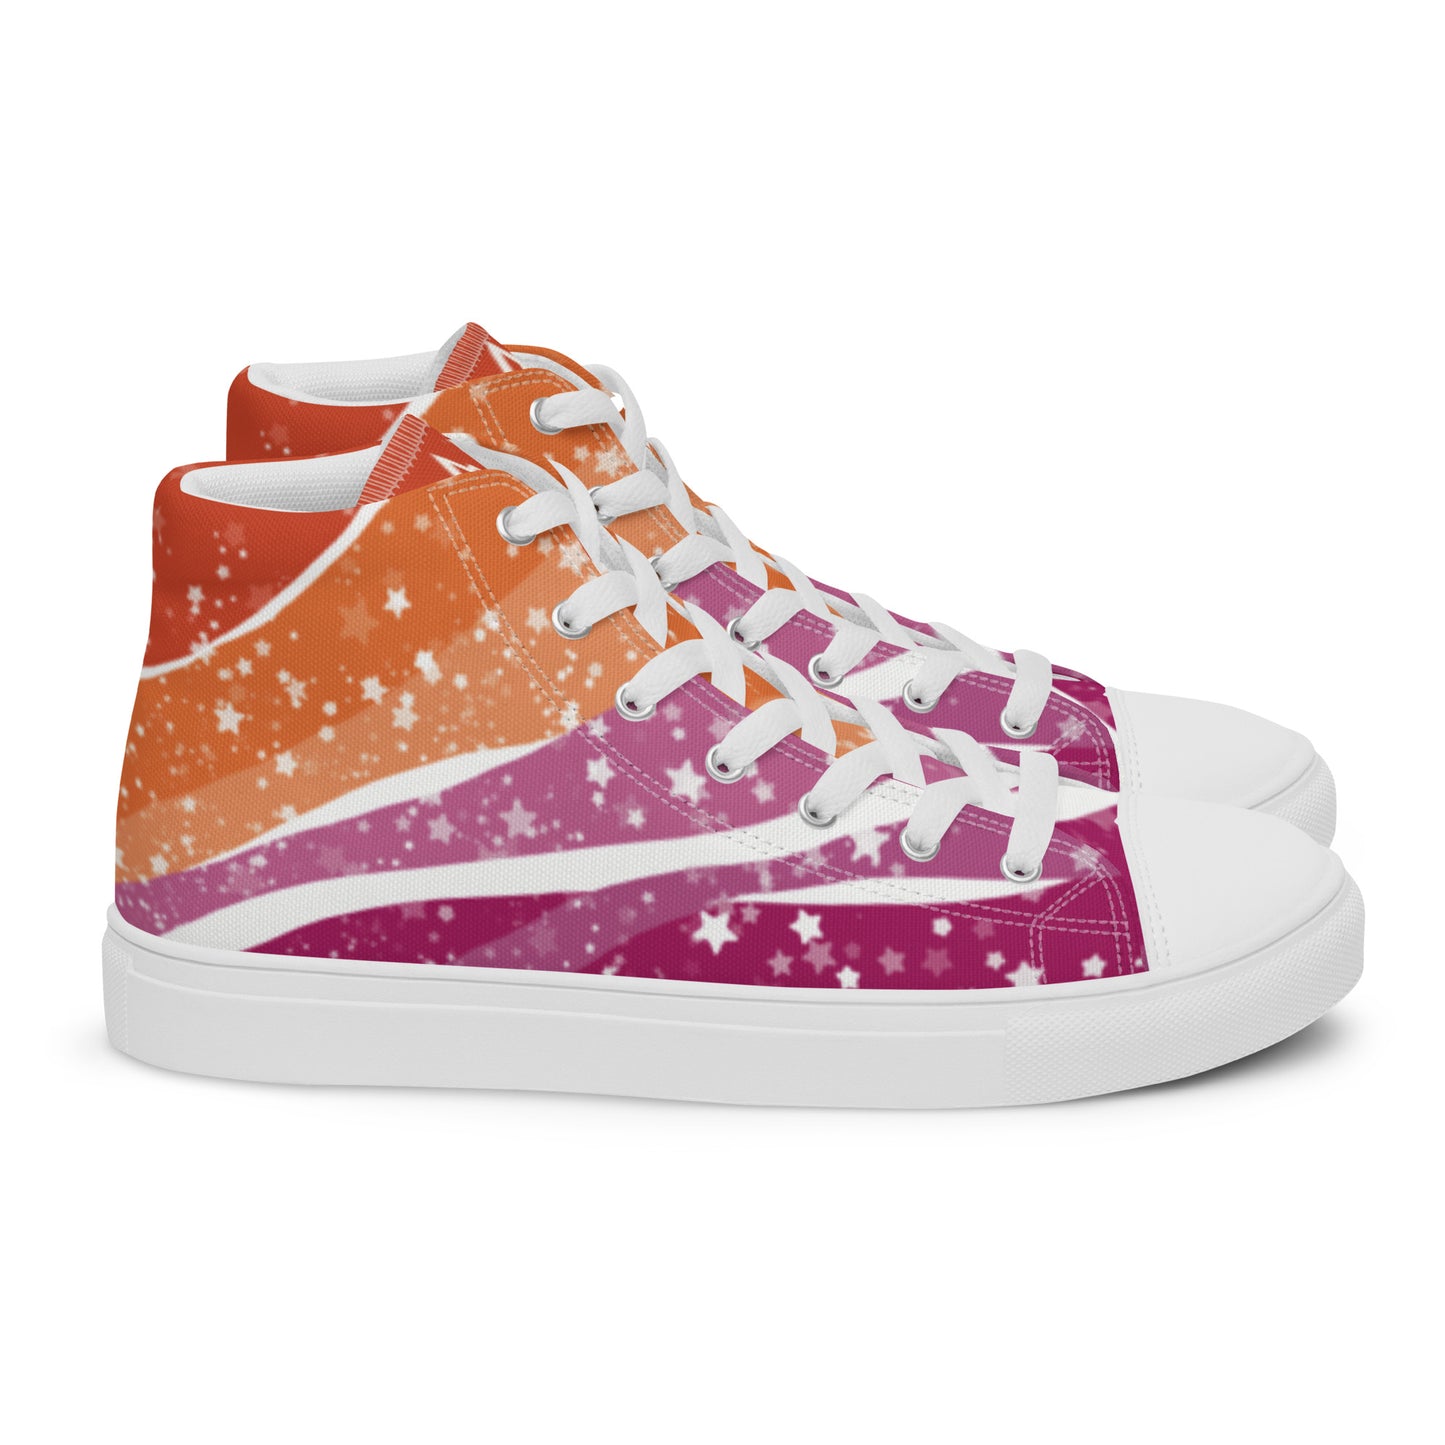 Right view: A pair of high top shoes with ribbons of lesbian flag colors and stars coming from the heel and getting larger across the shoe to the laces.